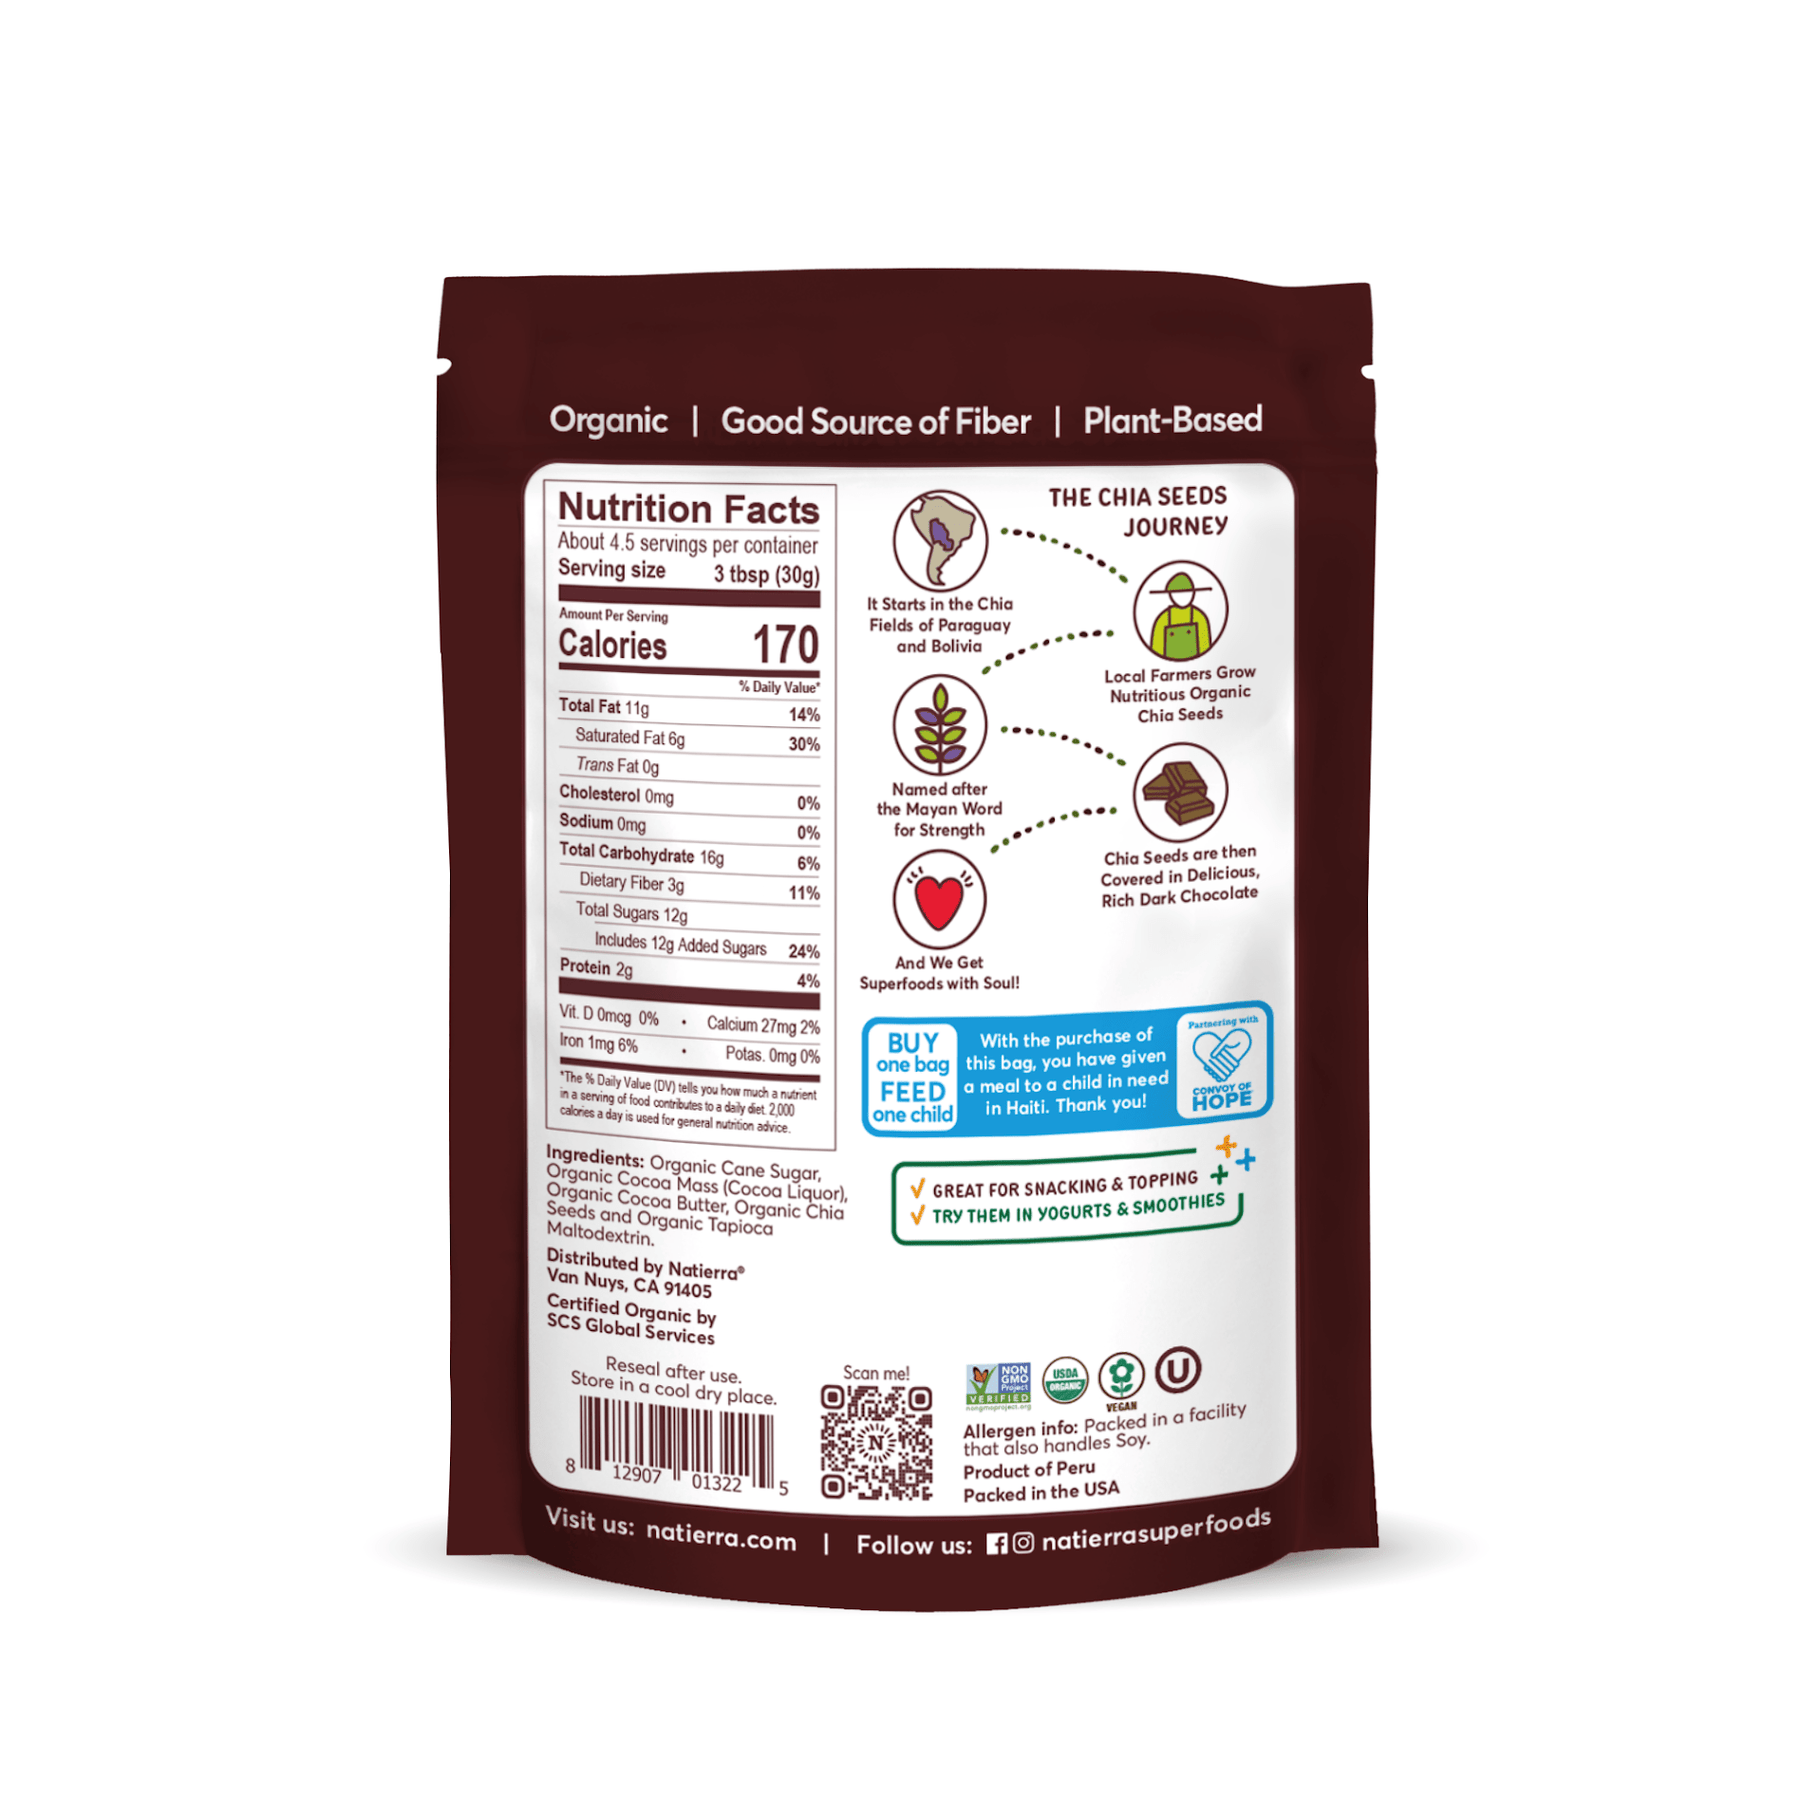 Natierra Organic Dark Chocolate Chia Seeds bag with nutrition facts, journey and main product claims